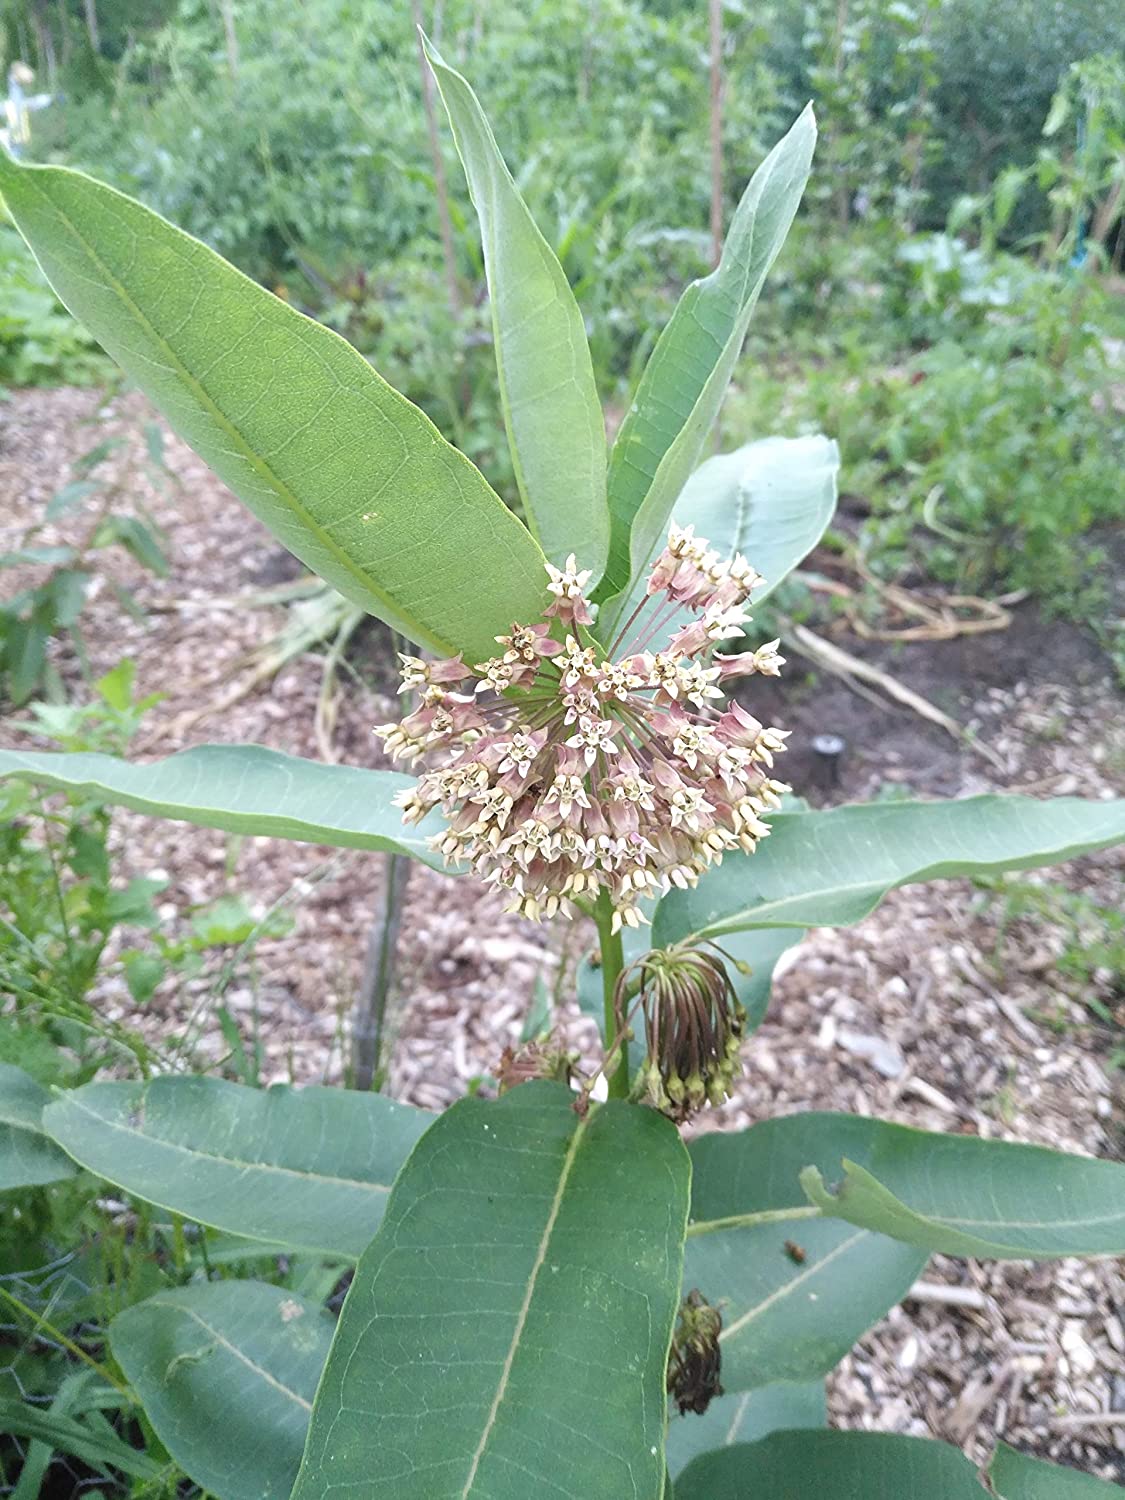 Hundredfold Common Milkweed Native Wild Flower 30 Seeds - Asclepias syriaca Milk Weed, Food Source for Monarch Caterpillar and Butterfly